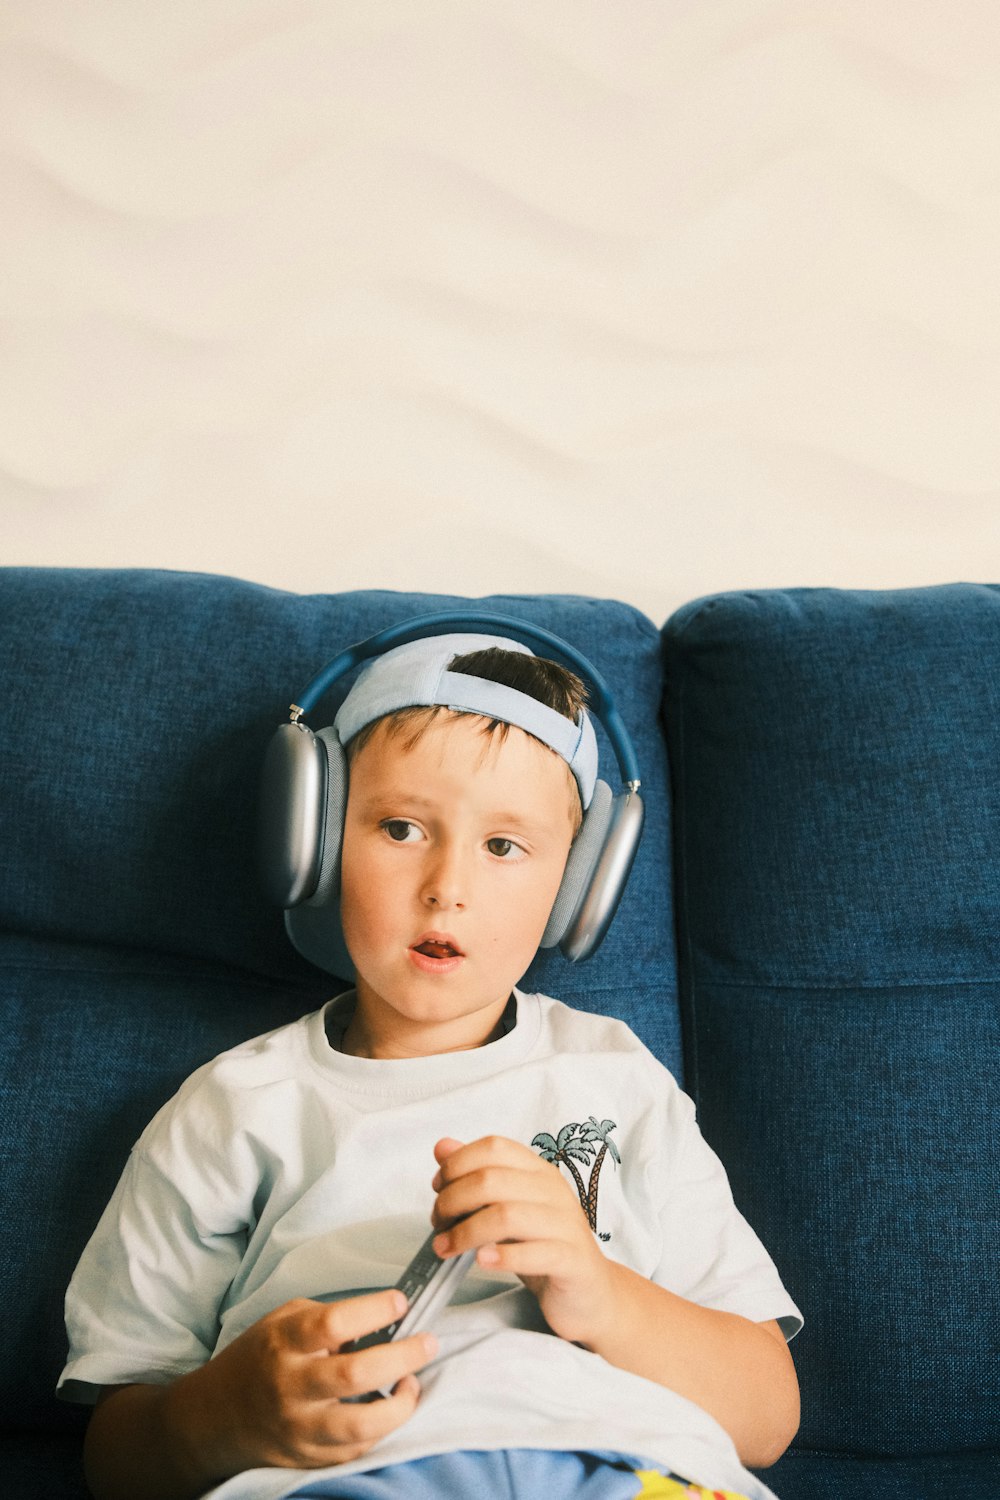 a young boy sitting on a blue couch wearing headphones